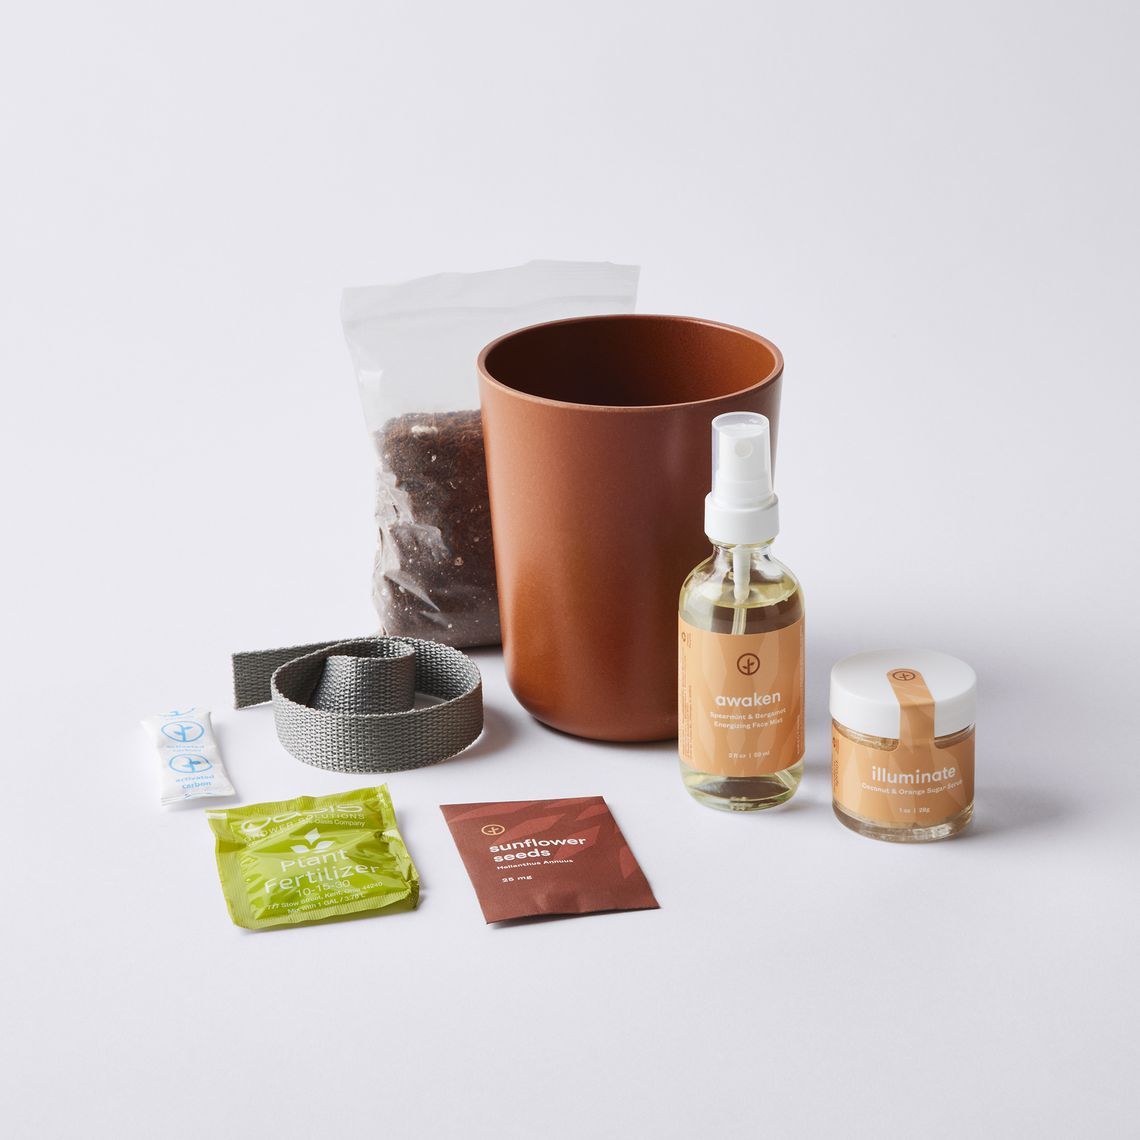 Modern Take Options with on 3 Grow Gift Sets, Food52 Care Kit Sprout